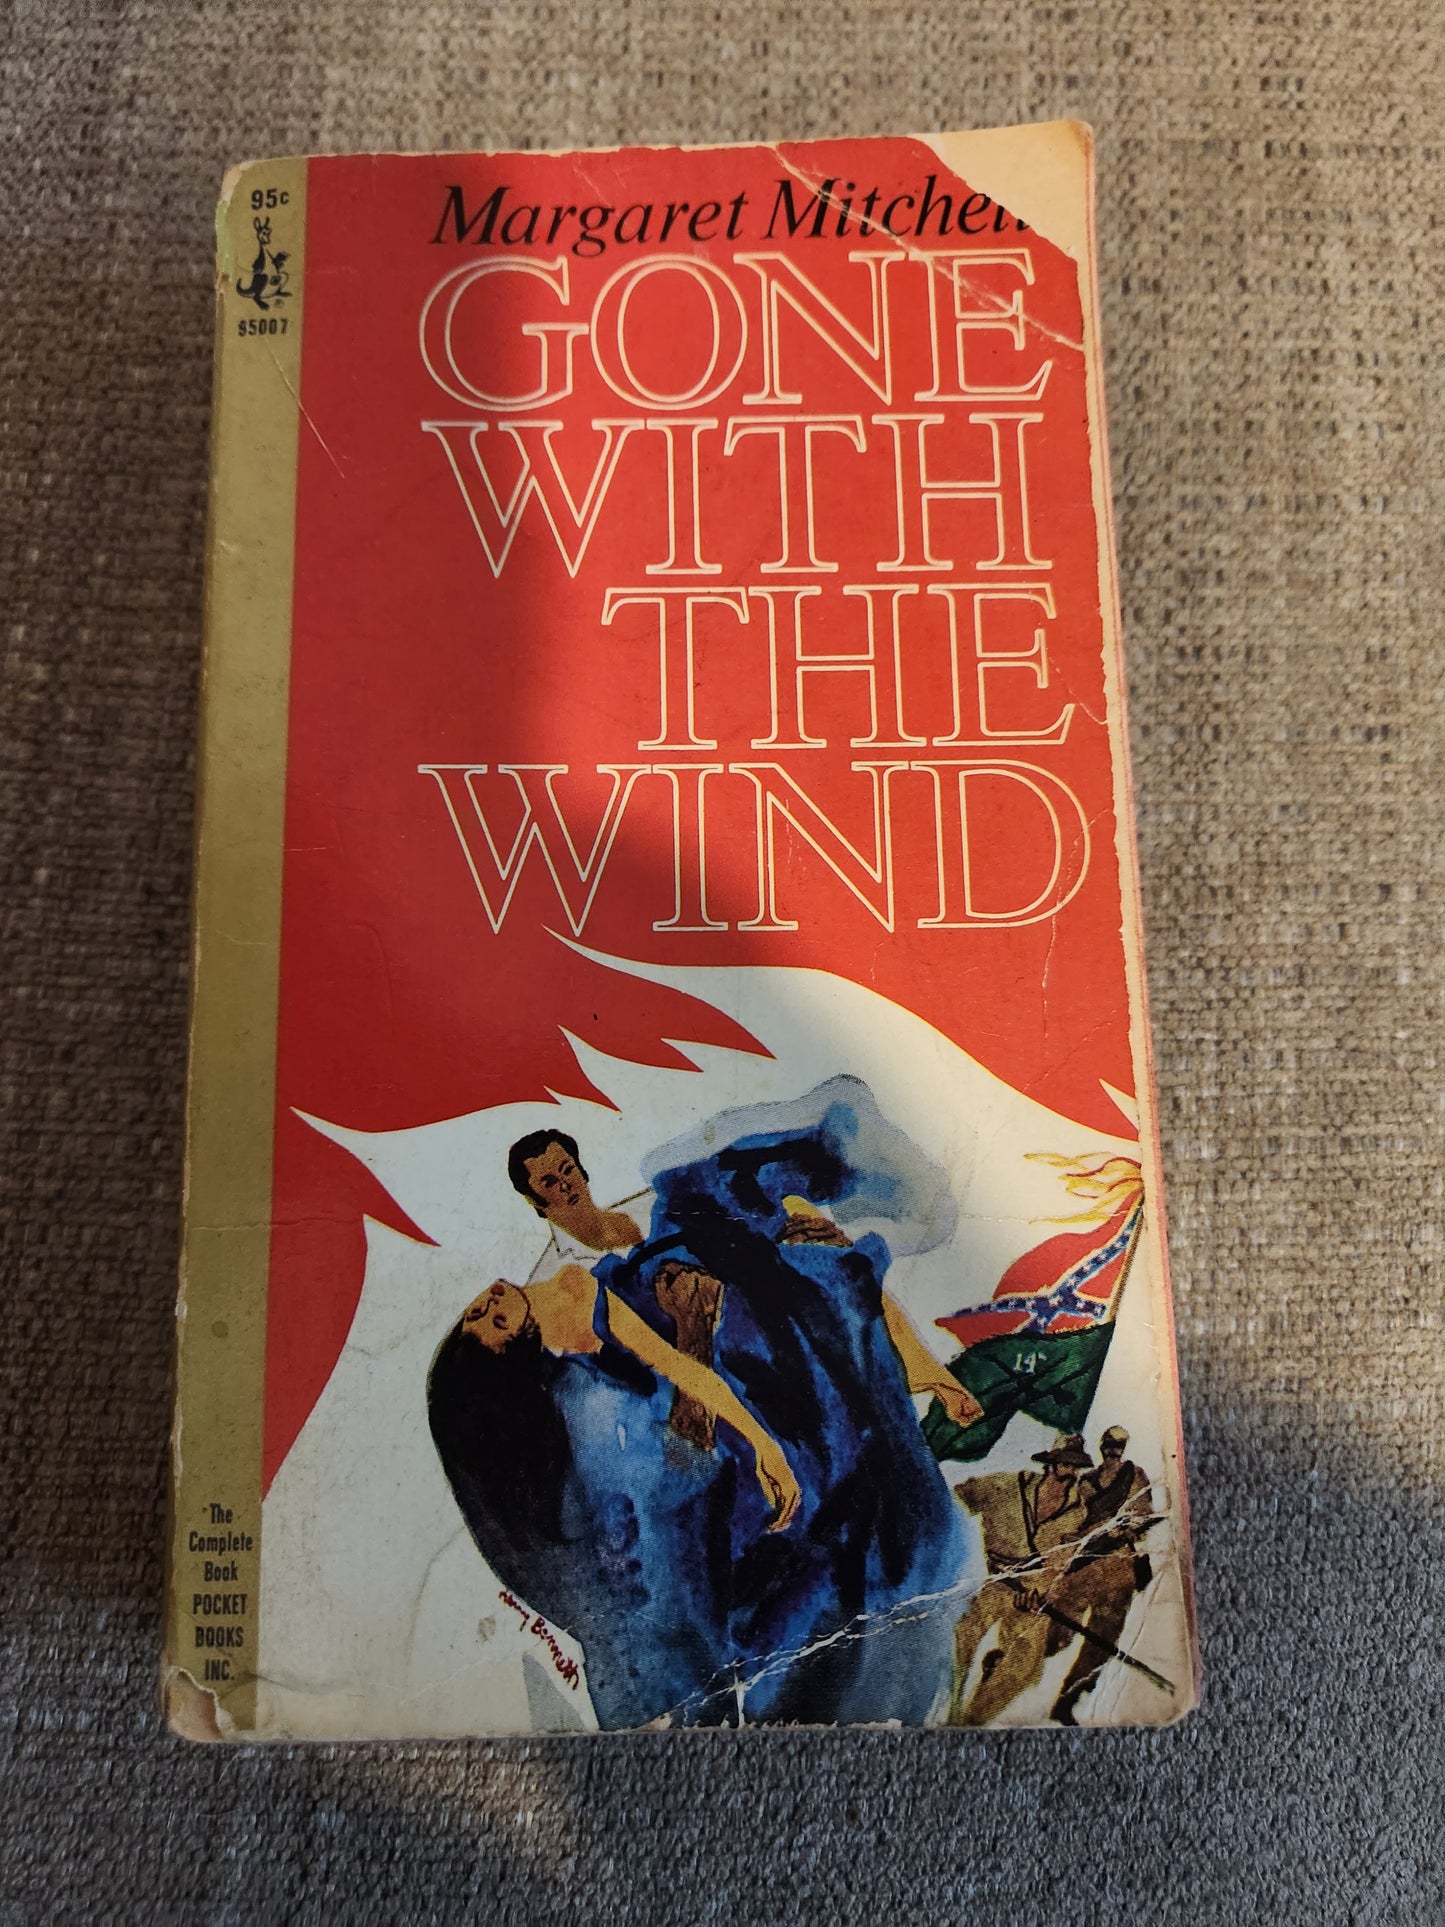 "Gone With The Wind" by Margaret Mitchell